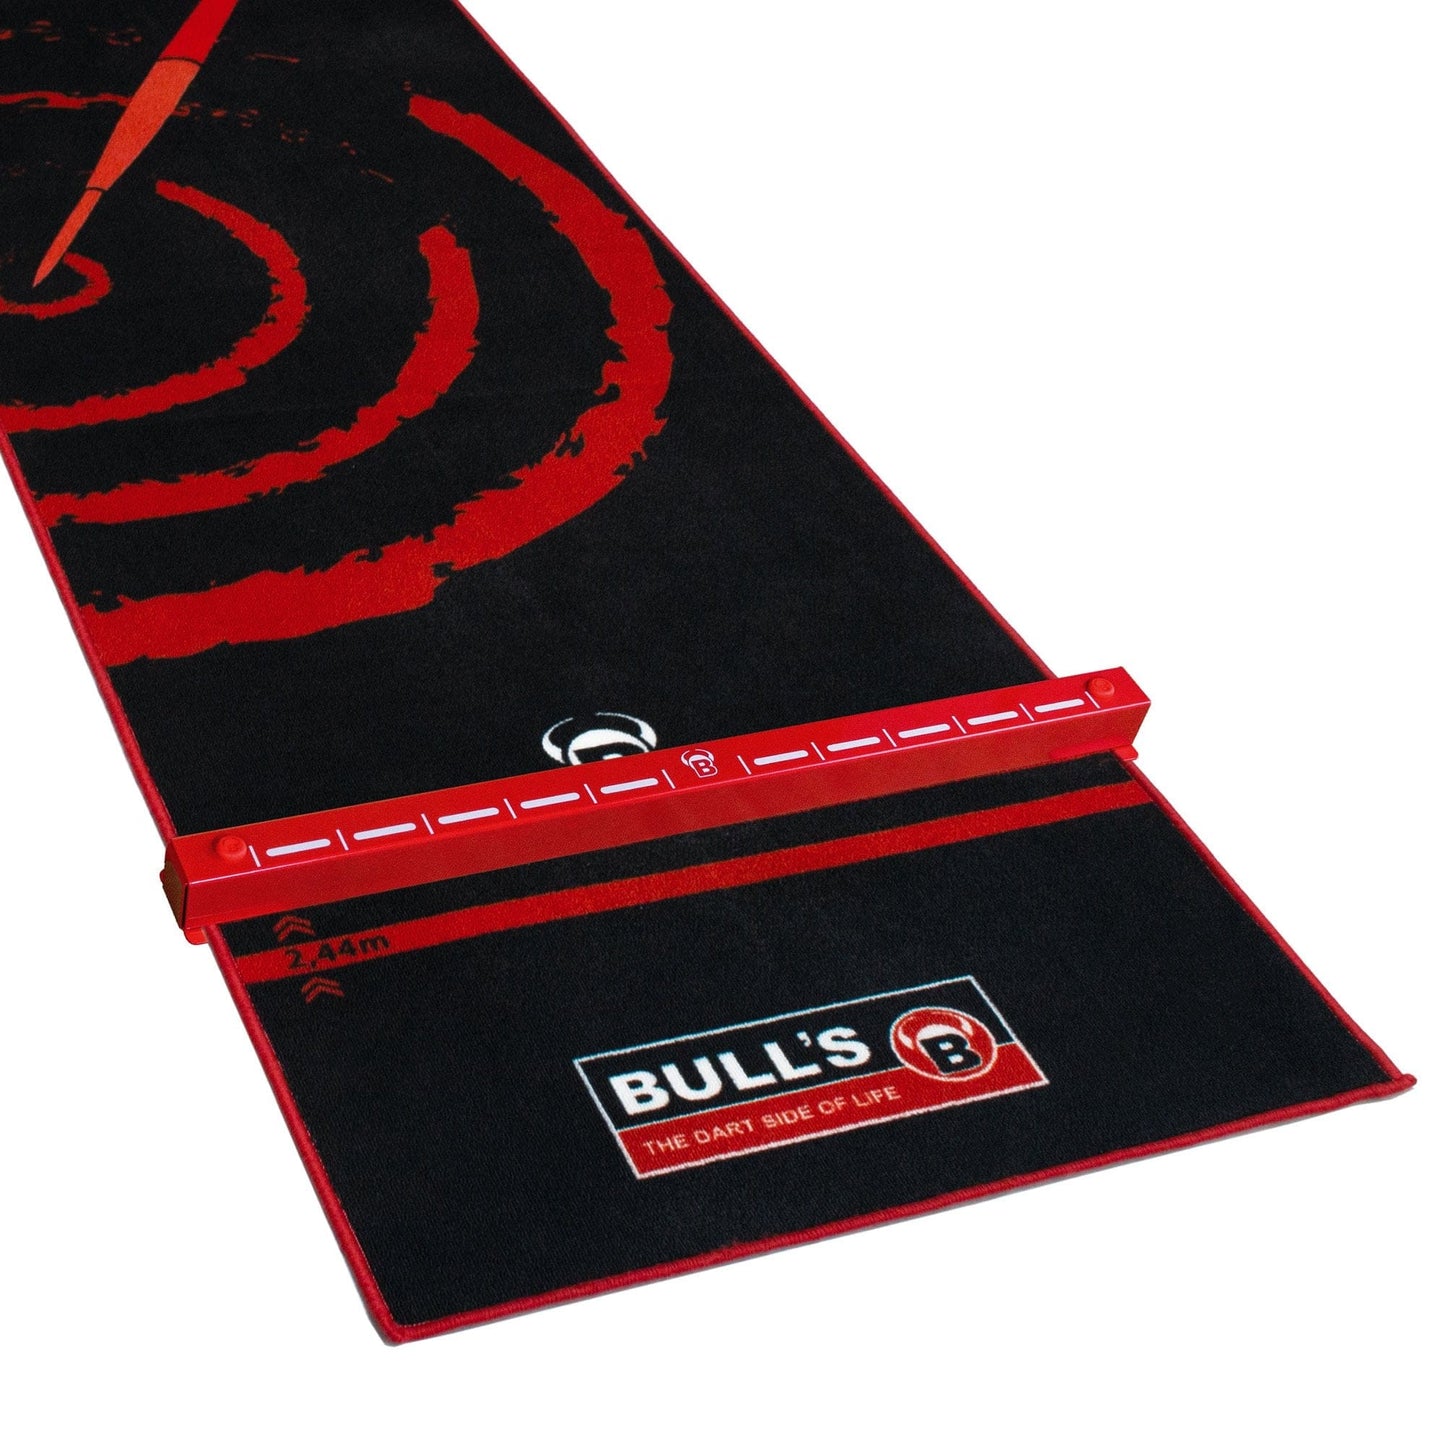 BULL'S Oky System - O90 - For Use With Dart Mats Upto 90cm Wide - Red Raised Oche